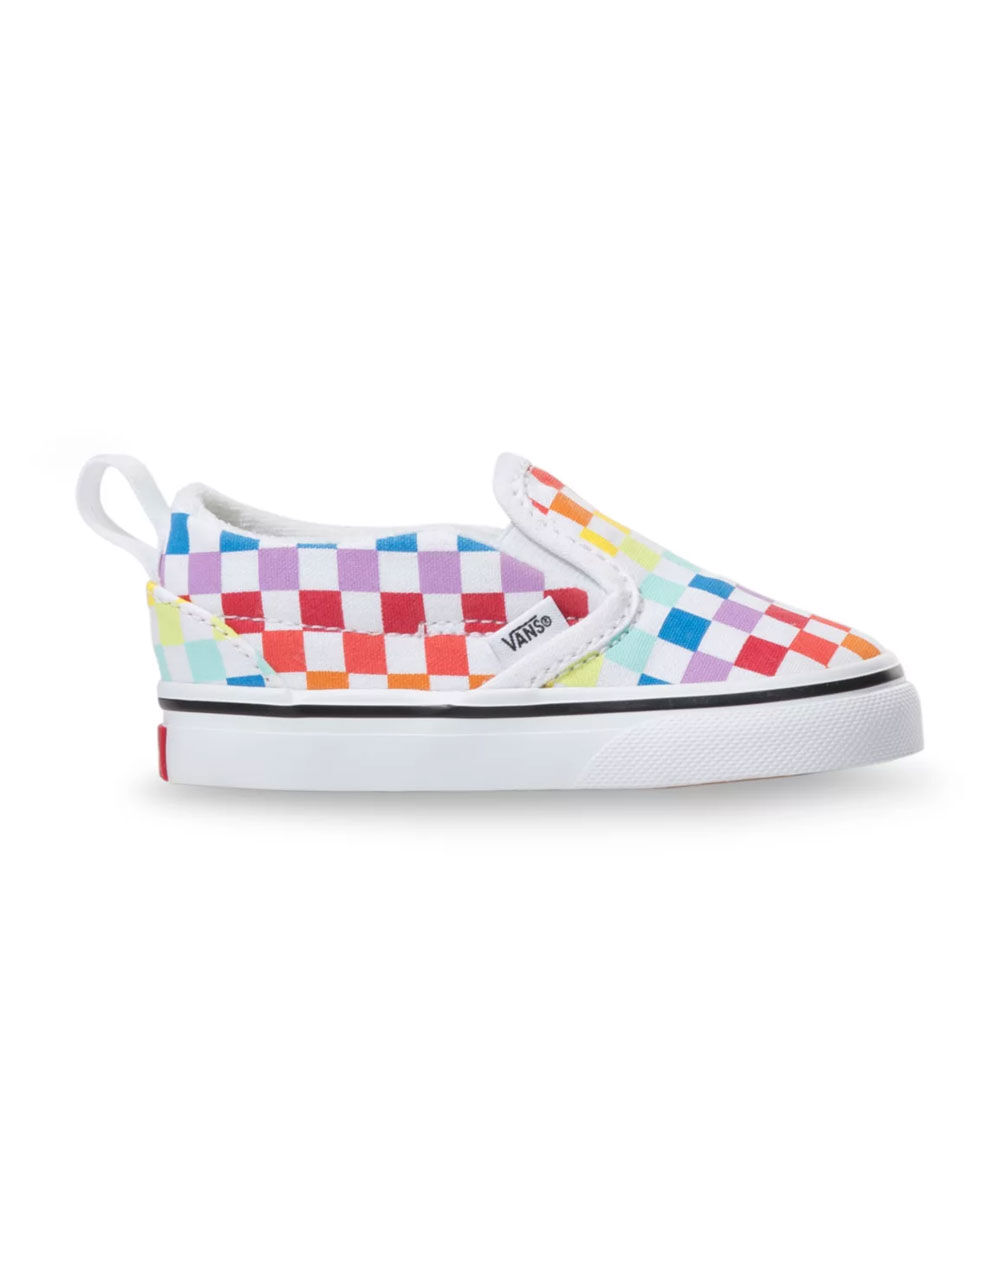 VANS Toddler Checkerboard Slip-On Velcro Shoes - RAINBOW CHECK | Tillys